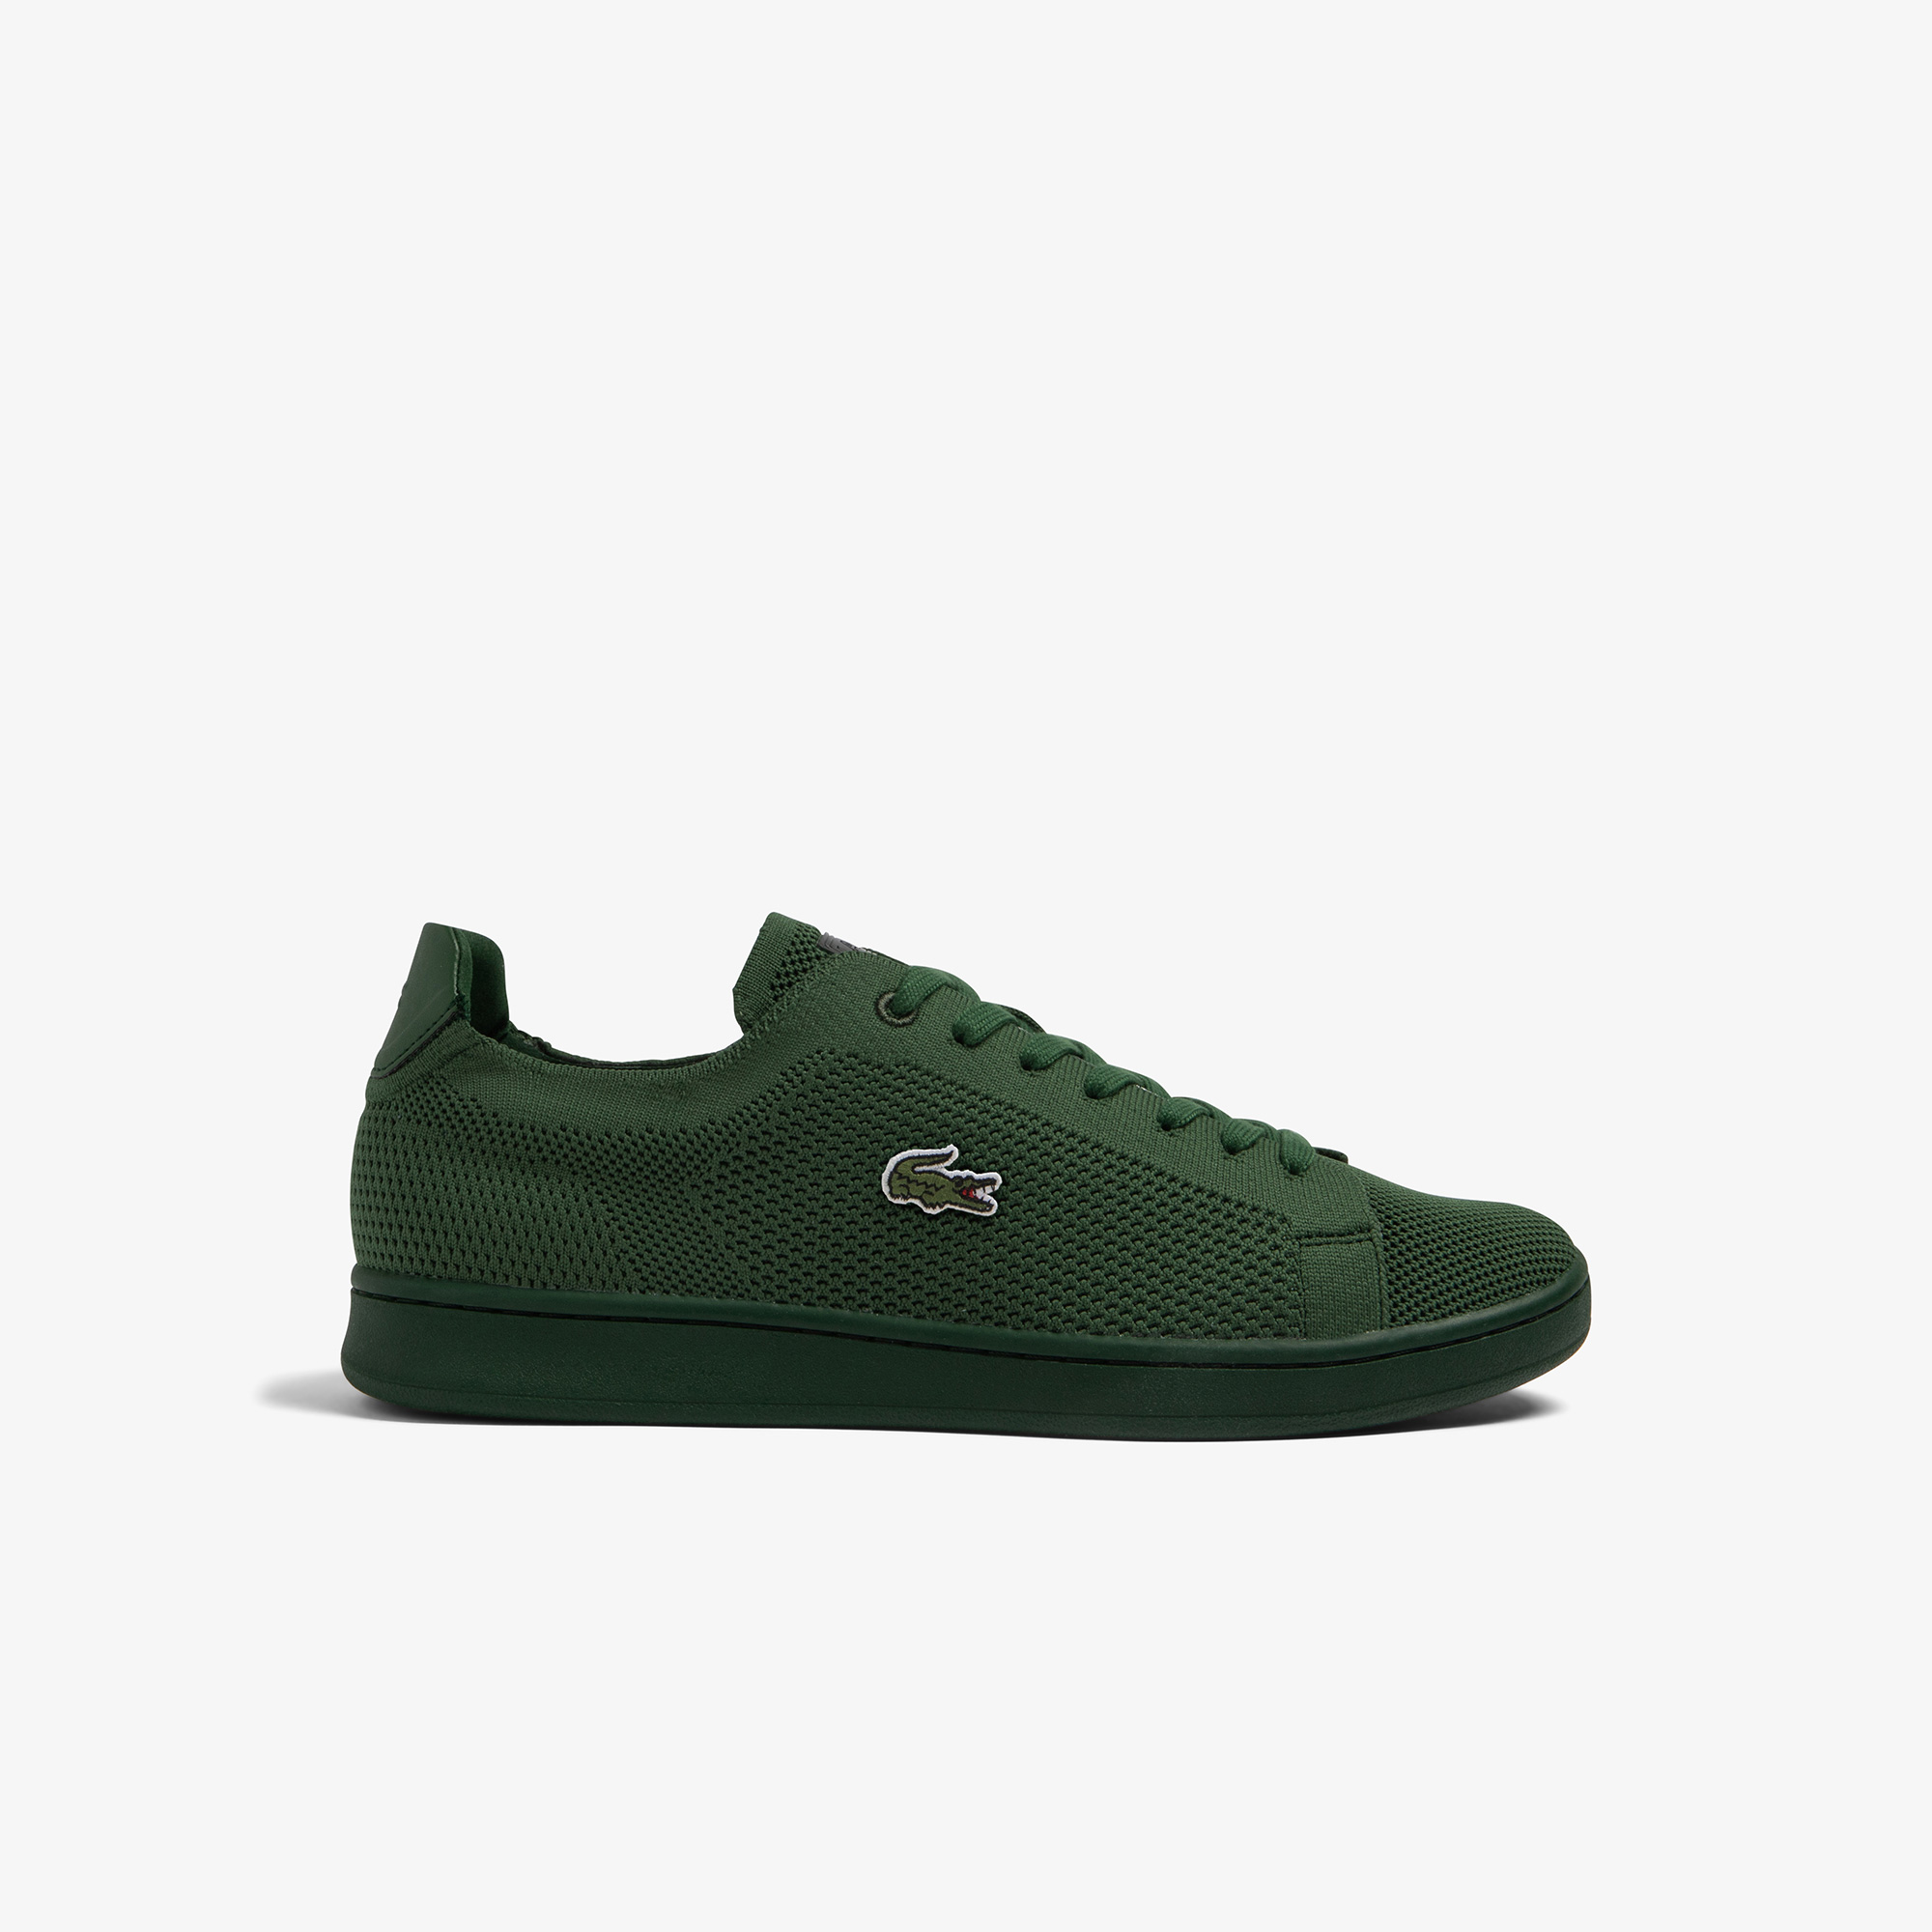 Lacoste tenisky CARNABY PIQUEE